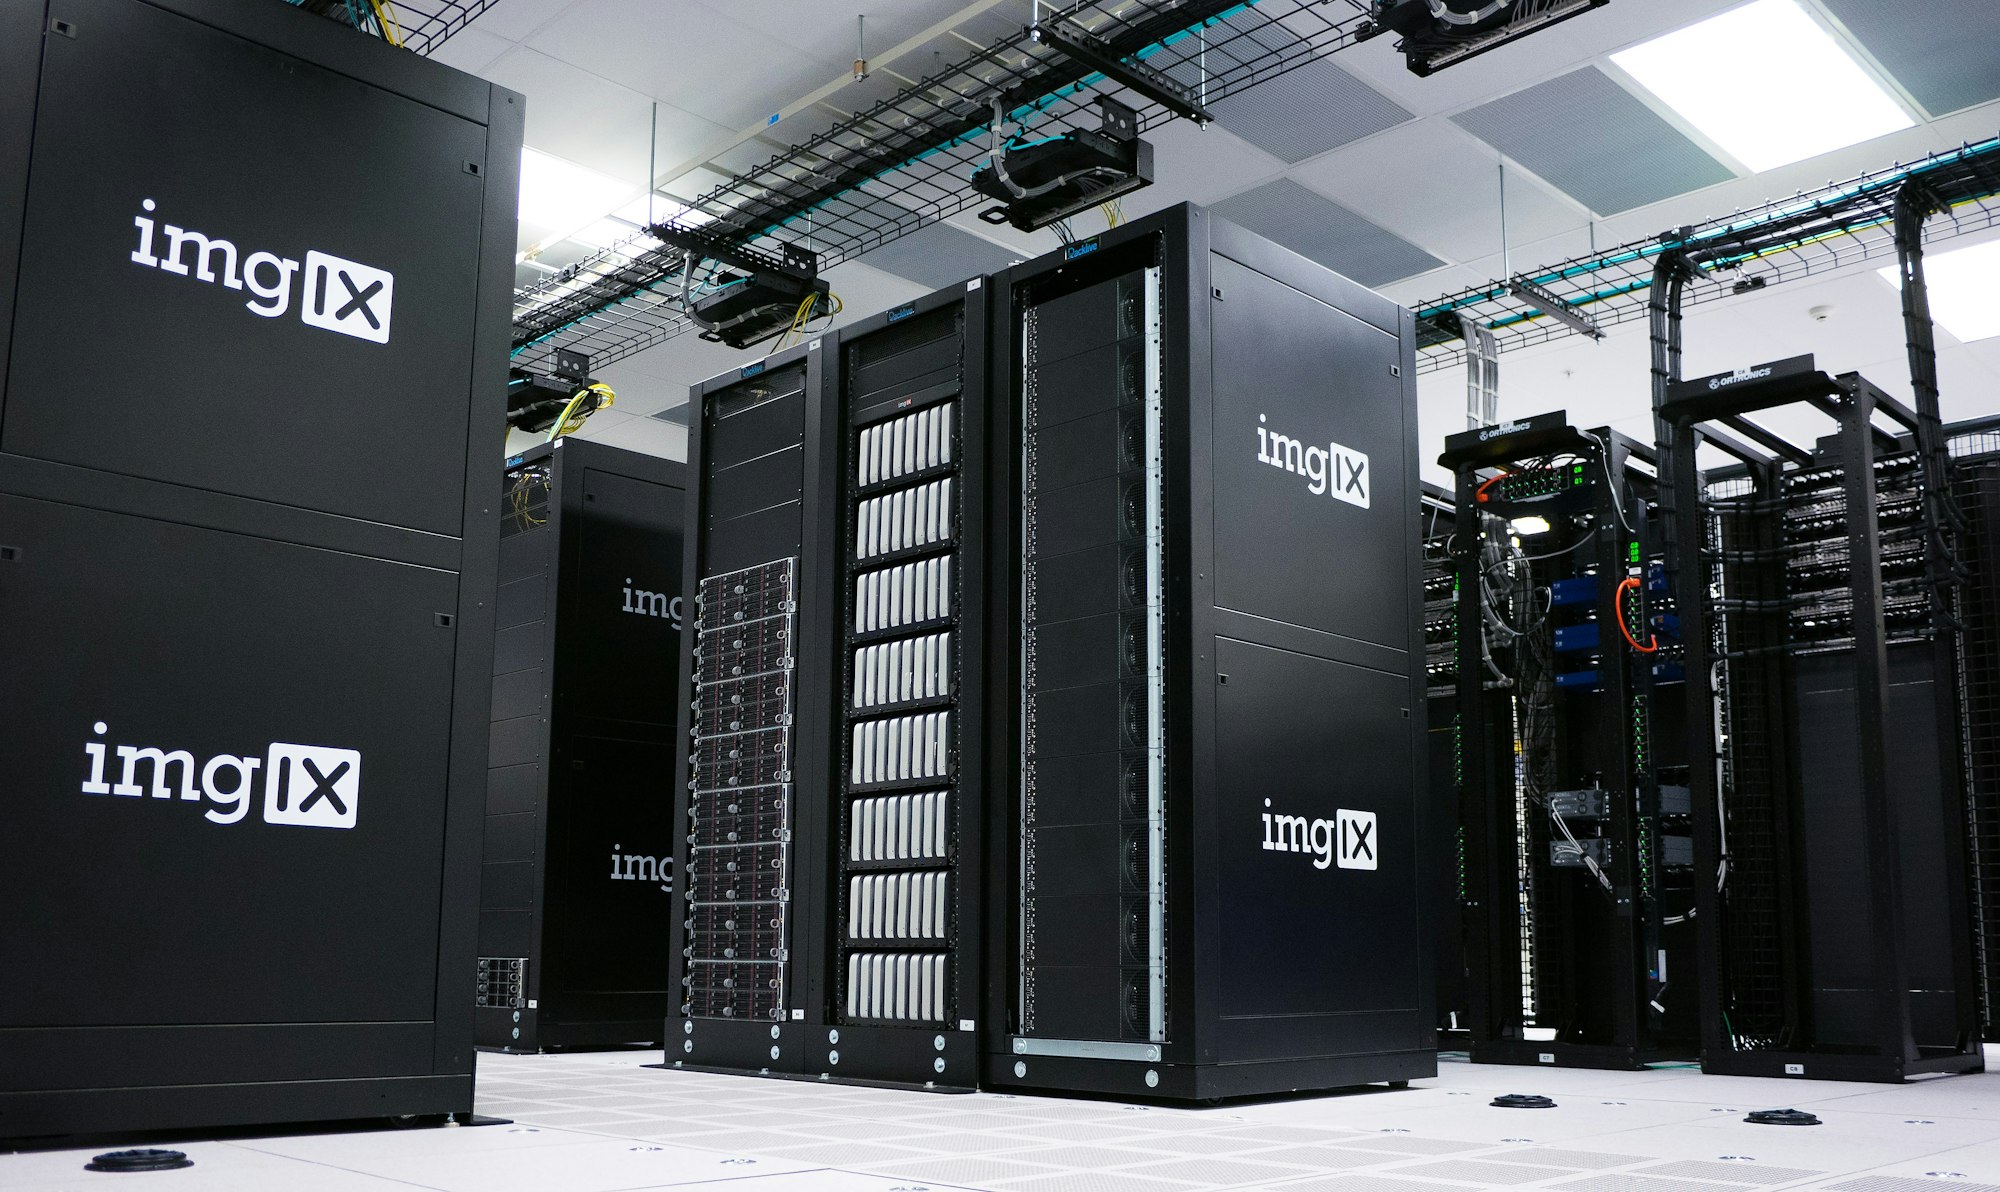 Nigeria's Digital Expansion Leads To Hyperscale Data Center Investments